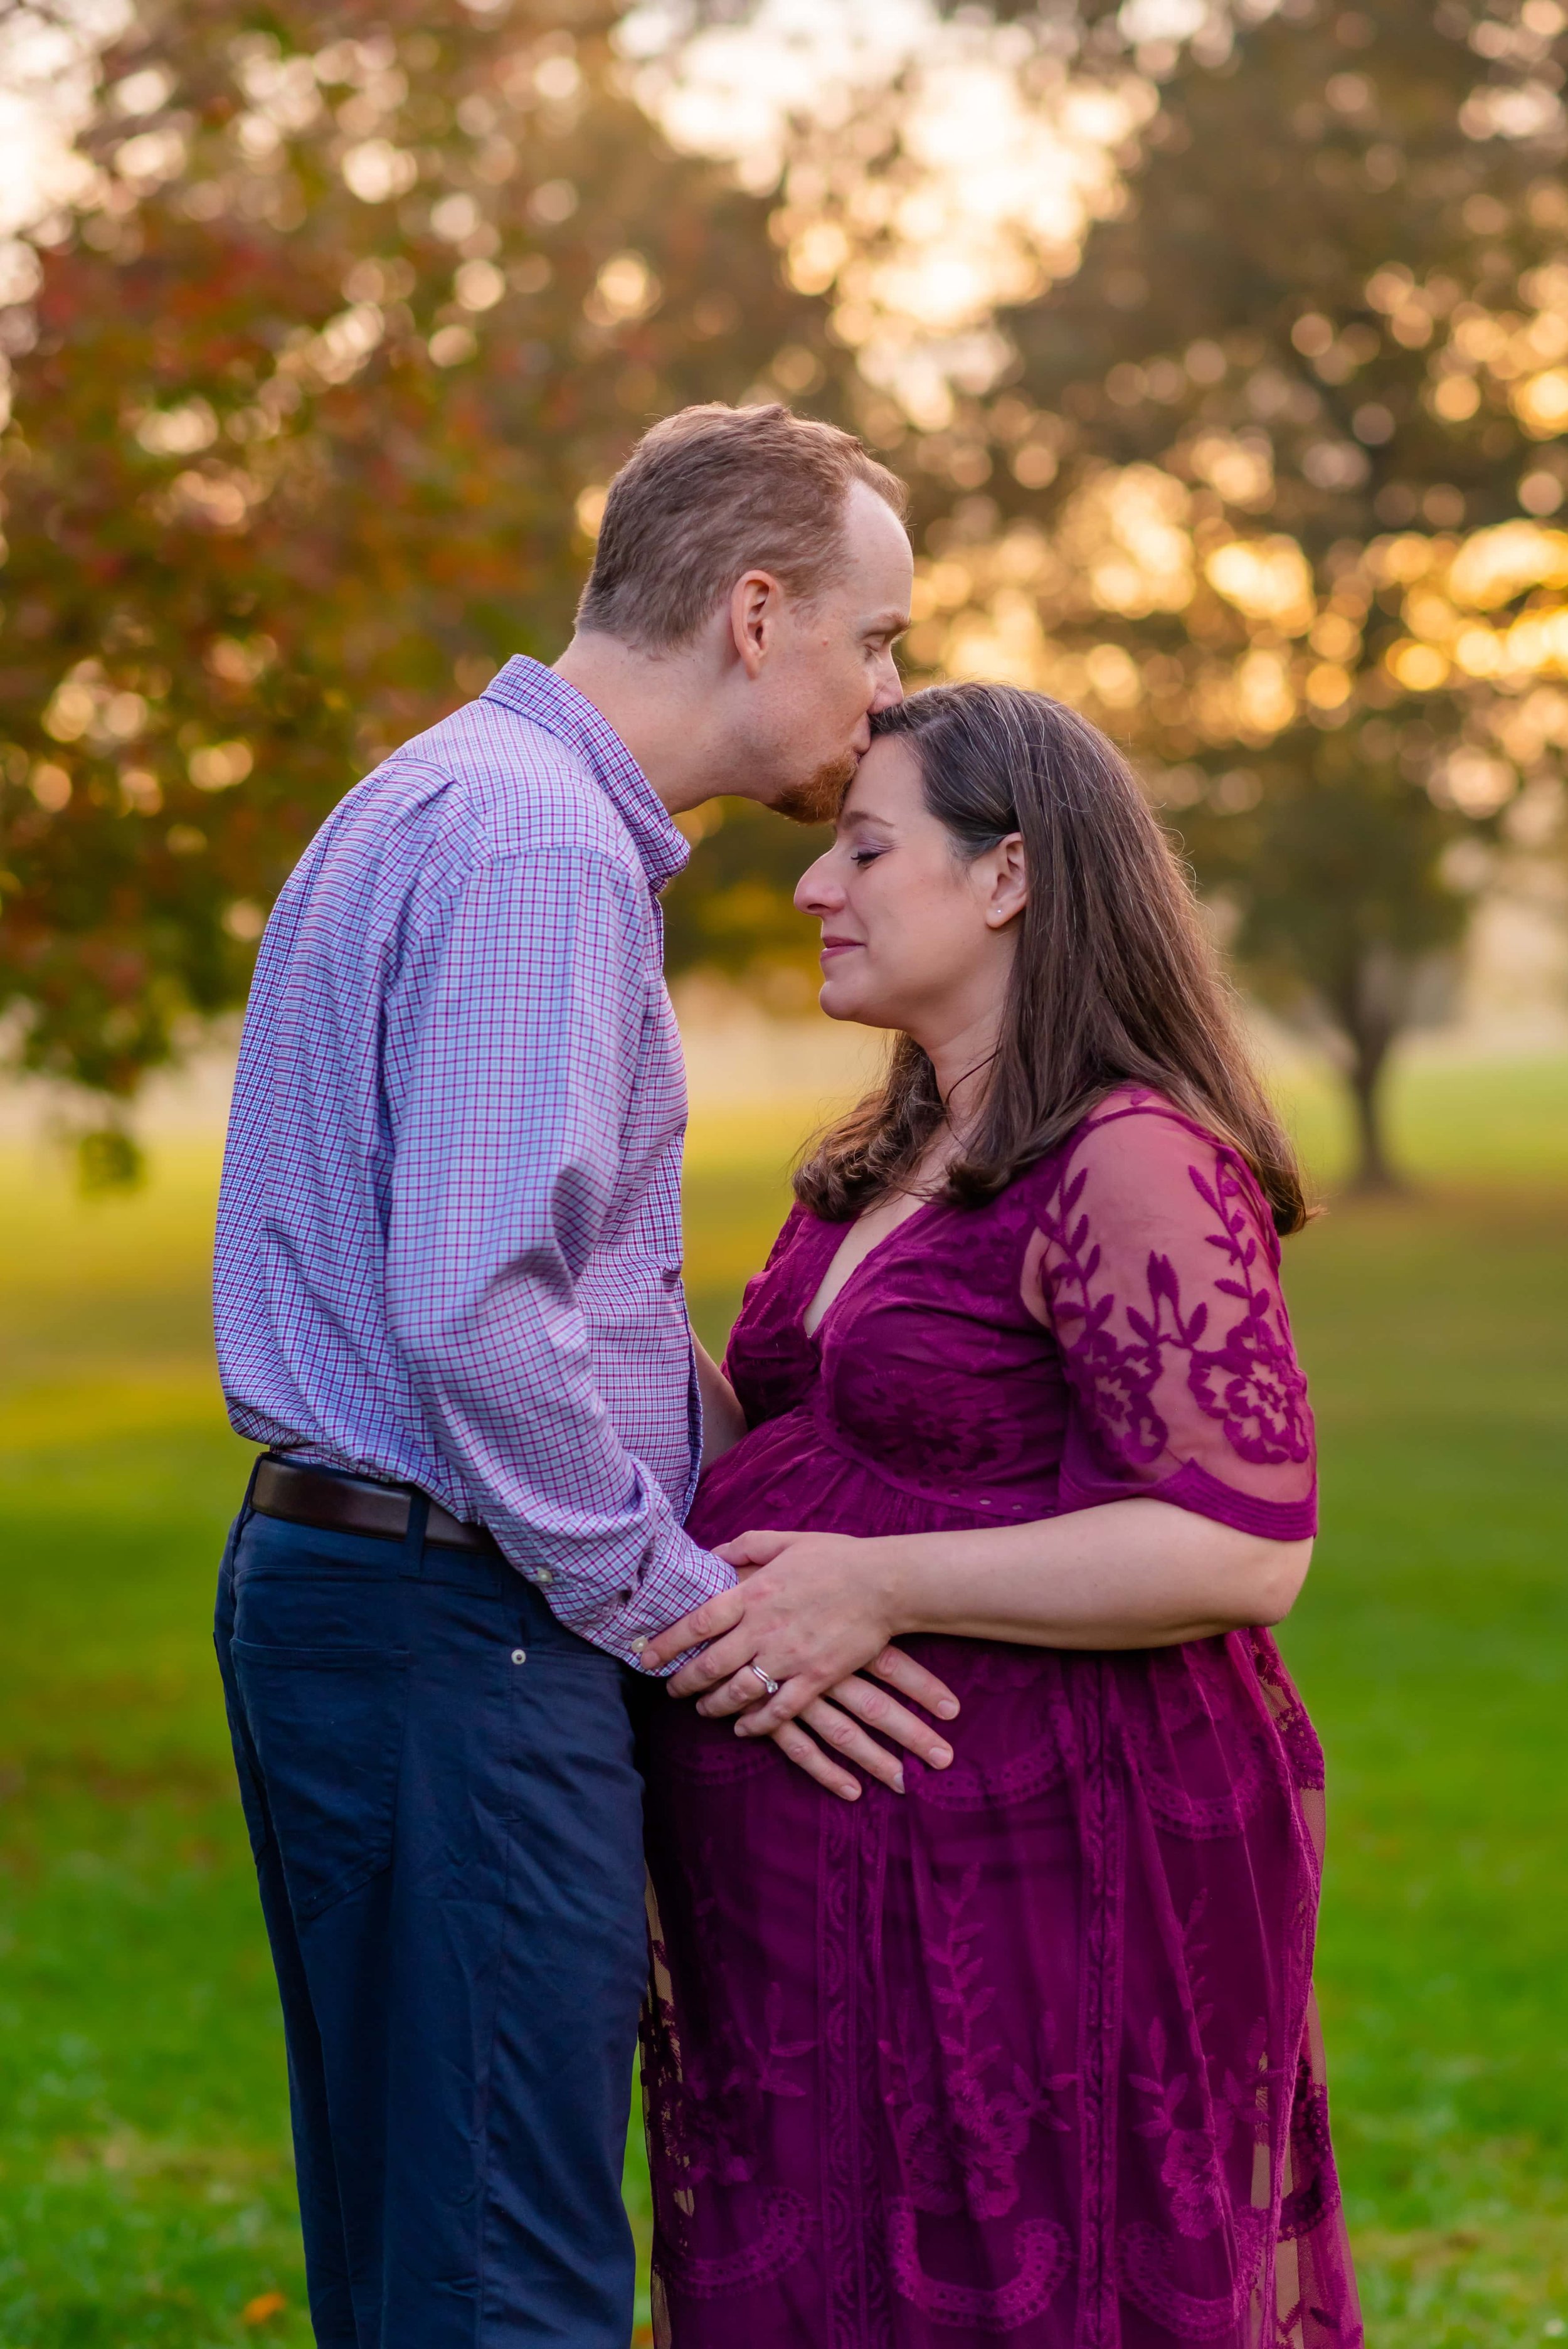 Maryland Maternity Photo - Husband kisses his wife on the forehead